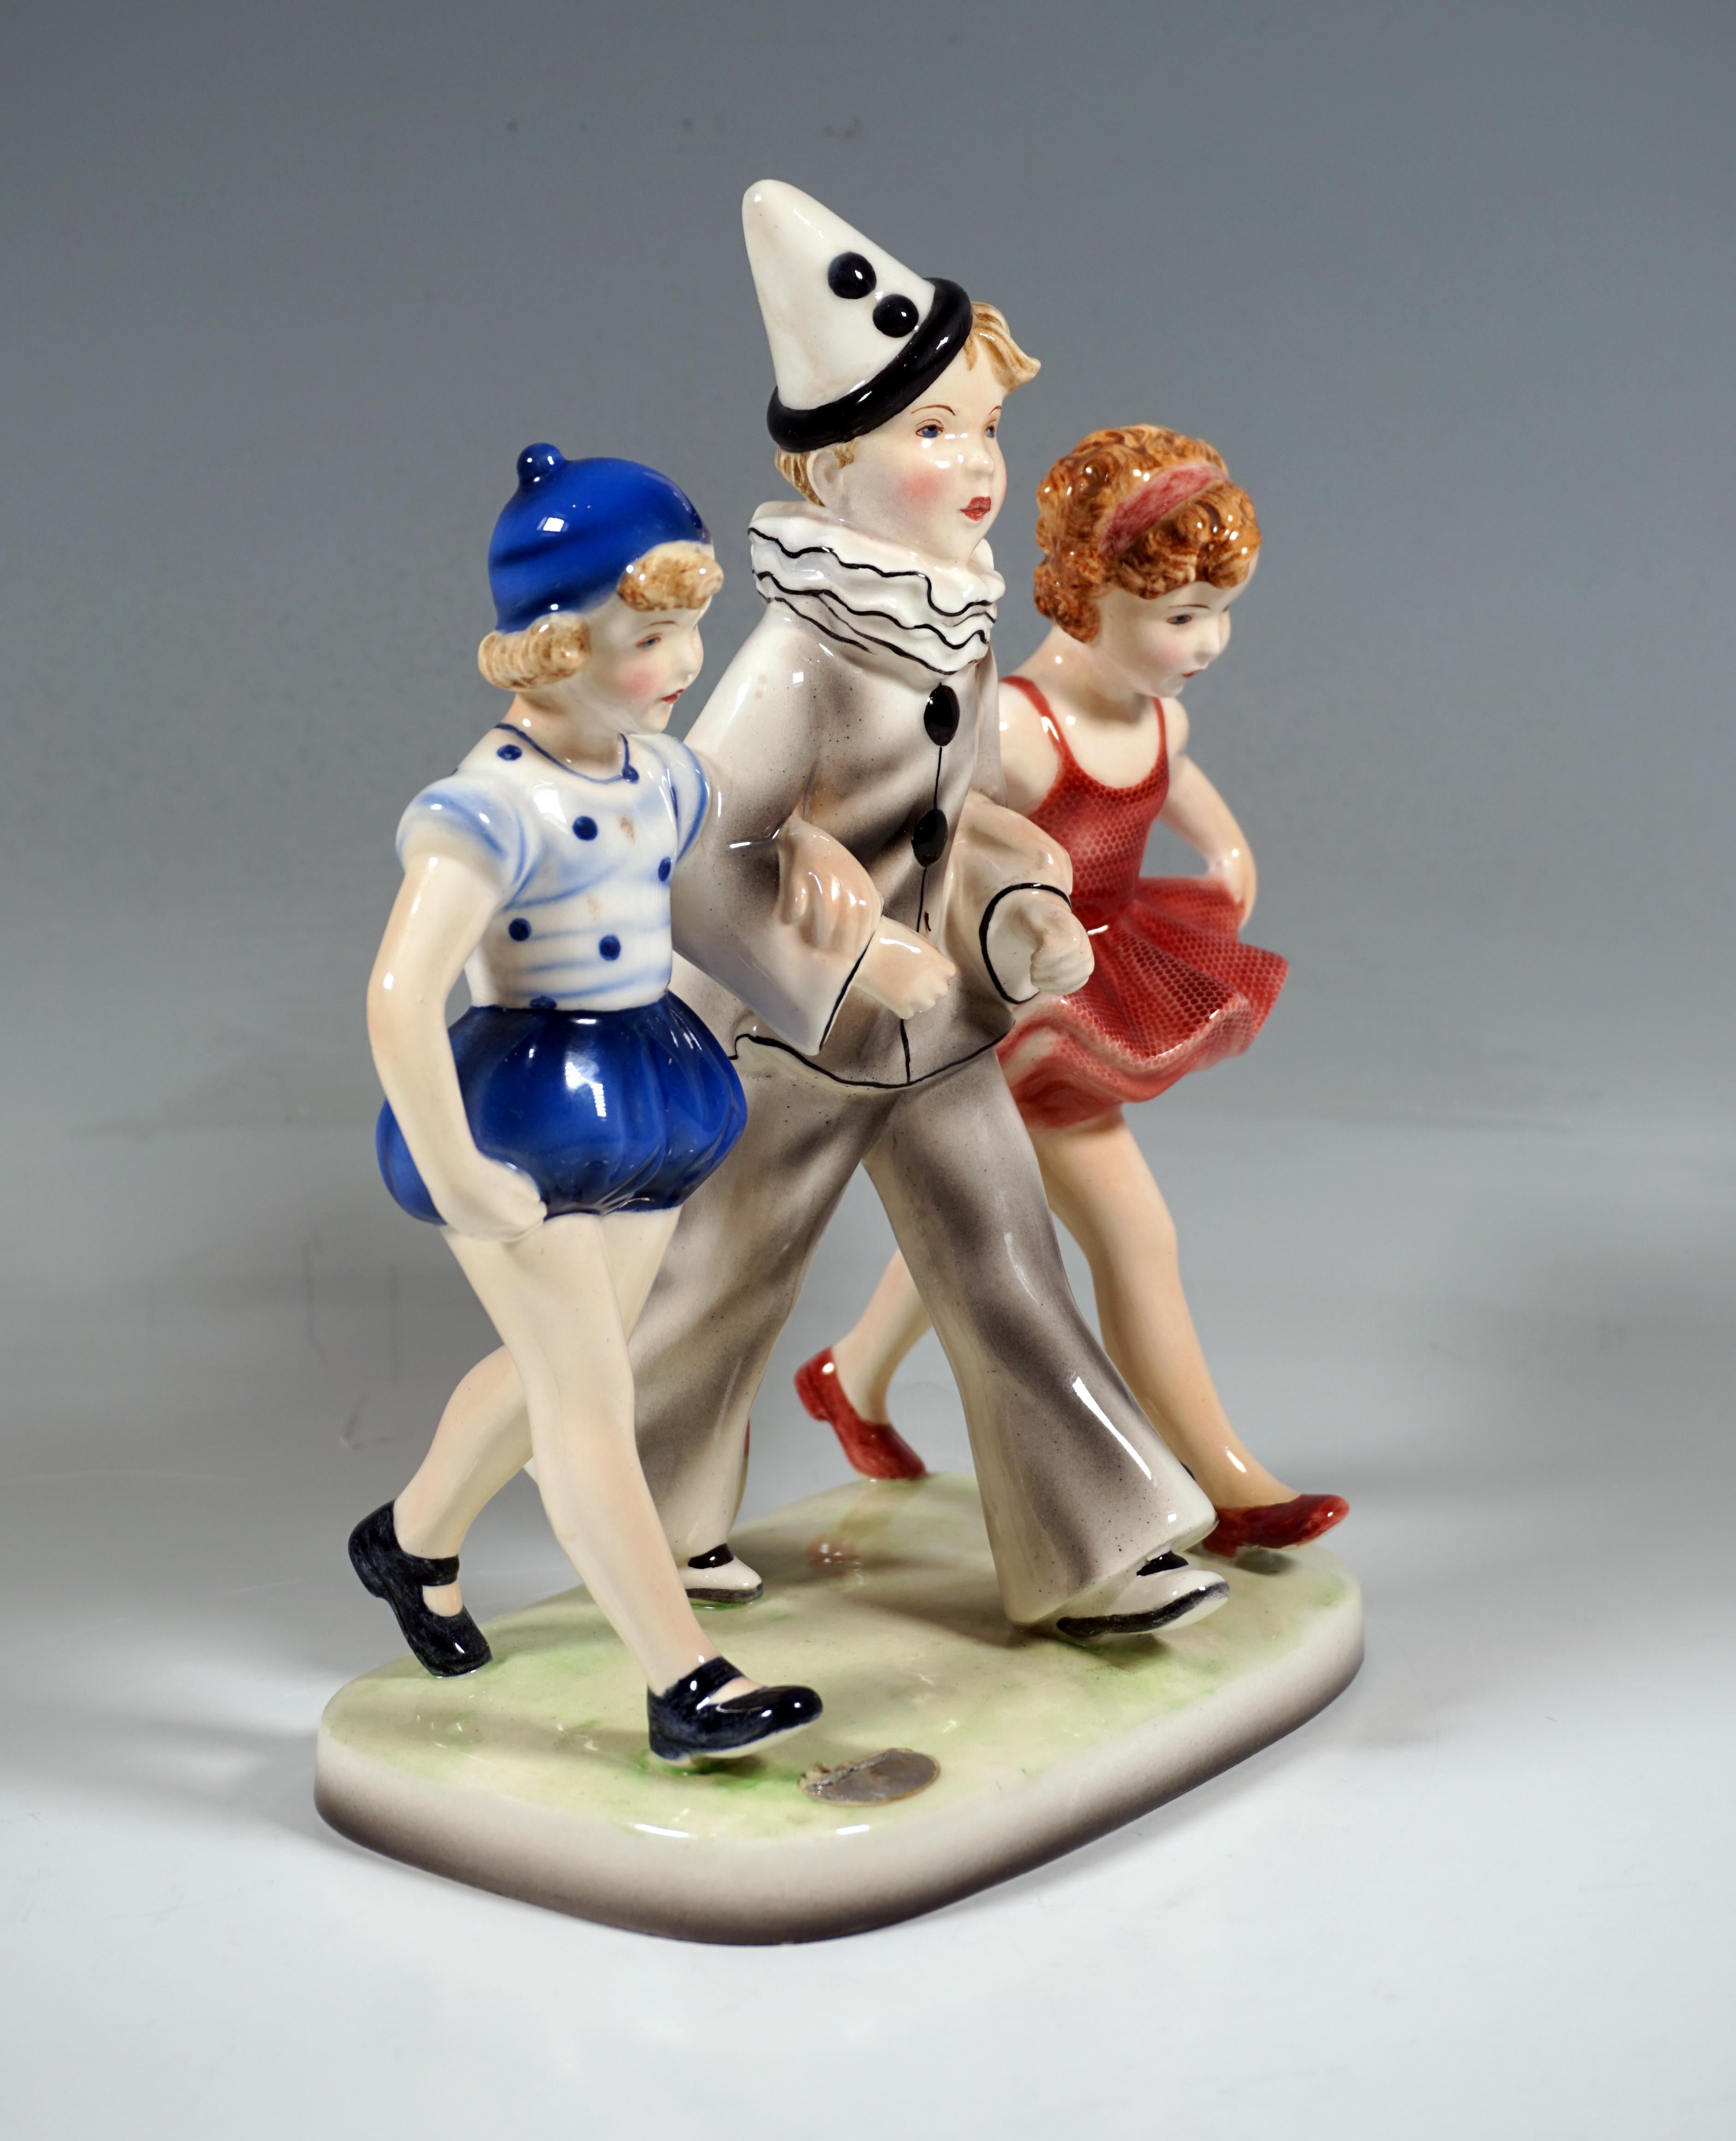 Three children walking side by side: in the middle a blond boy dressed as Pierrot with a pointed hat, arm in arm with two girls, one in a red tutu dress, the other in a blue dotted camisole with matching short harem pants and a bonnet.
On a